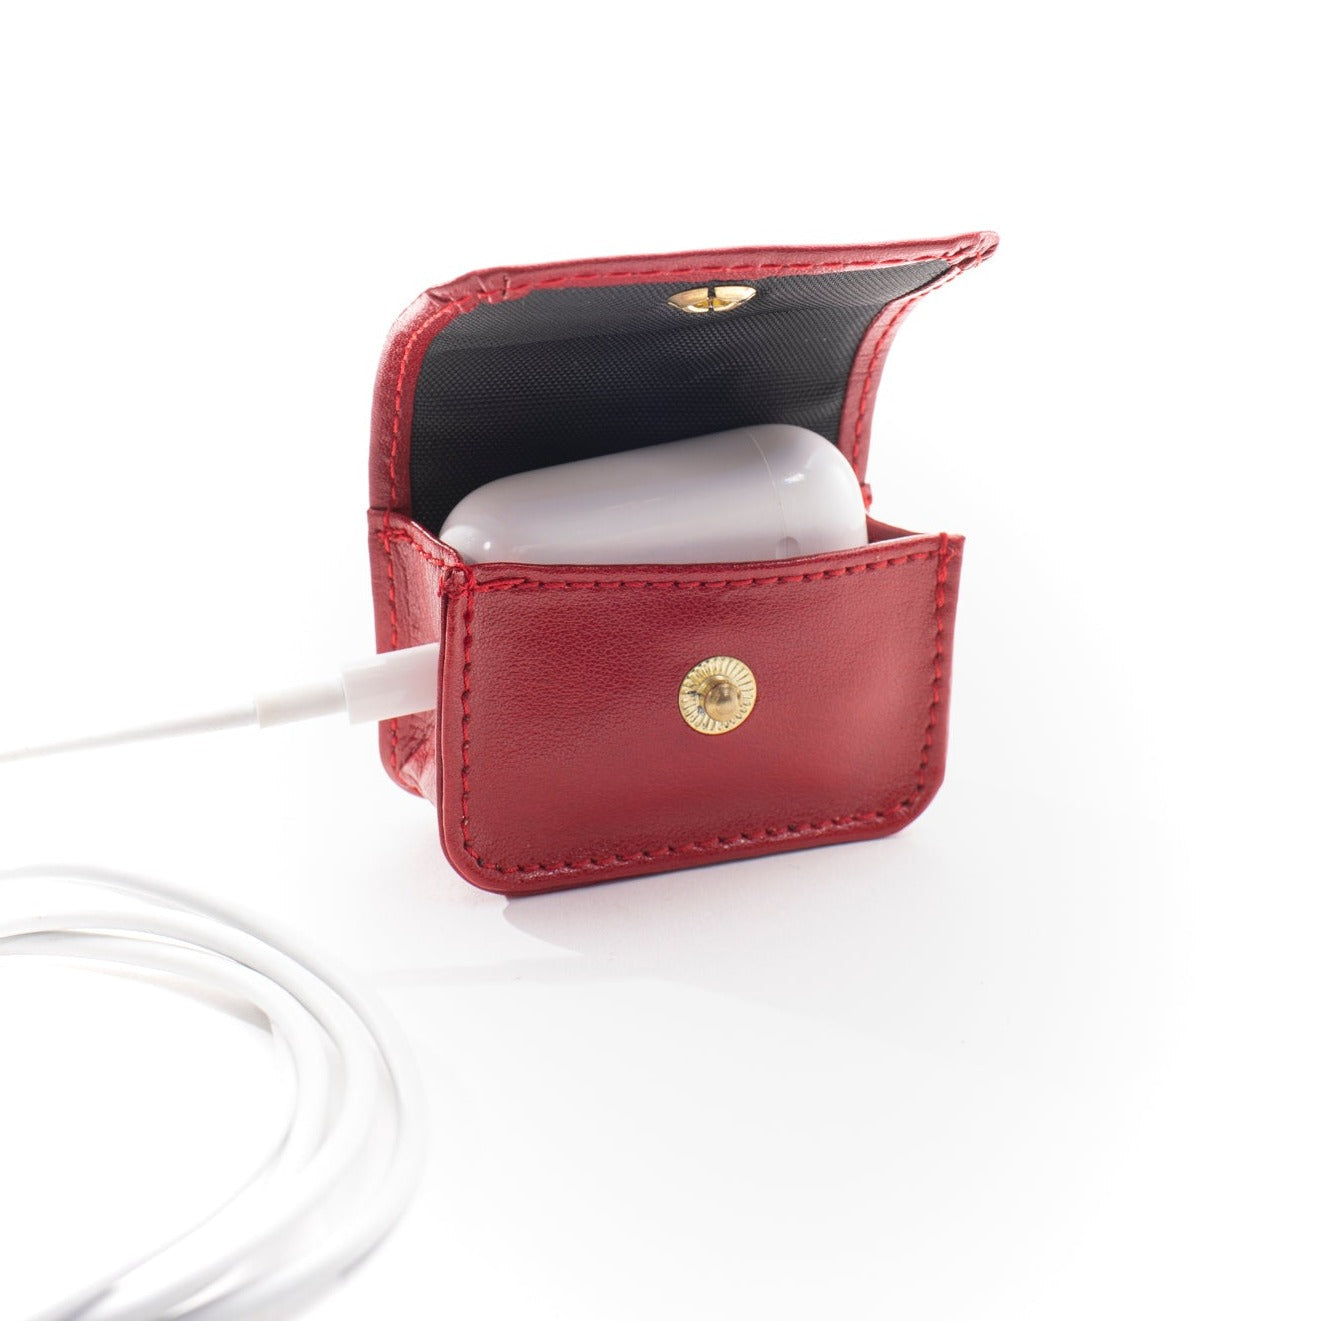 Earbud Pro Case - Ruby Red - Gold Toned Hardware